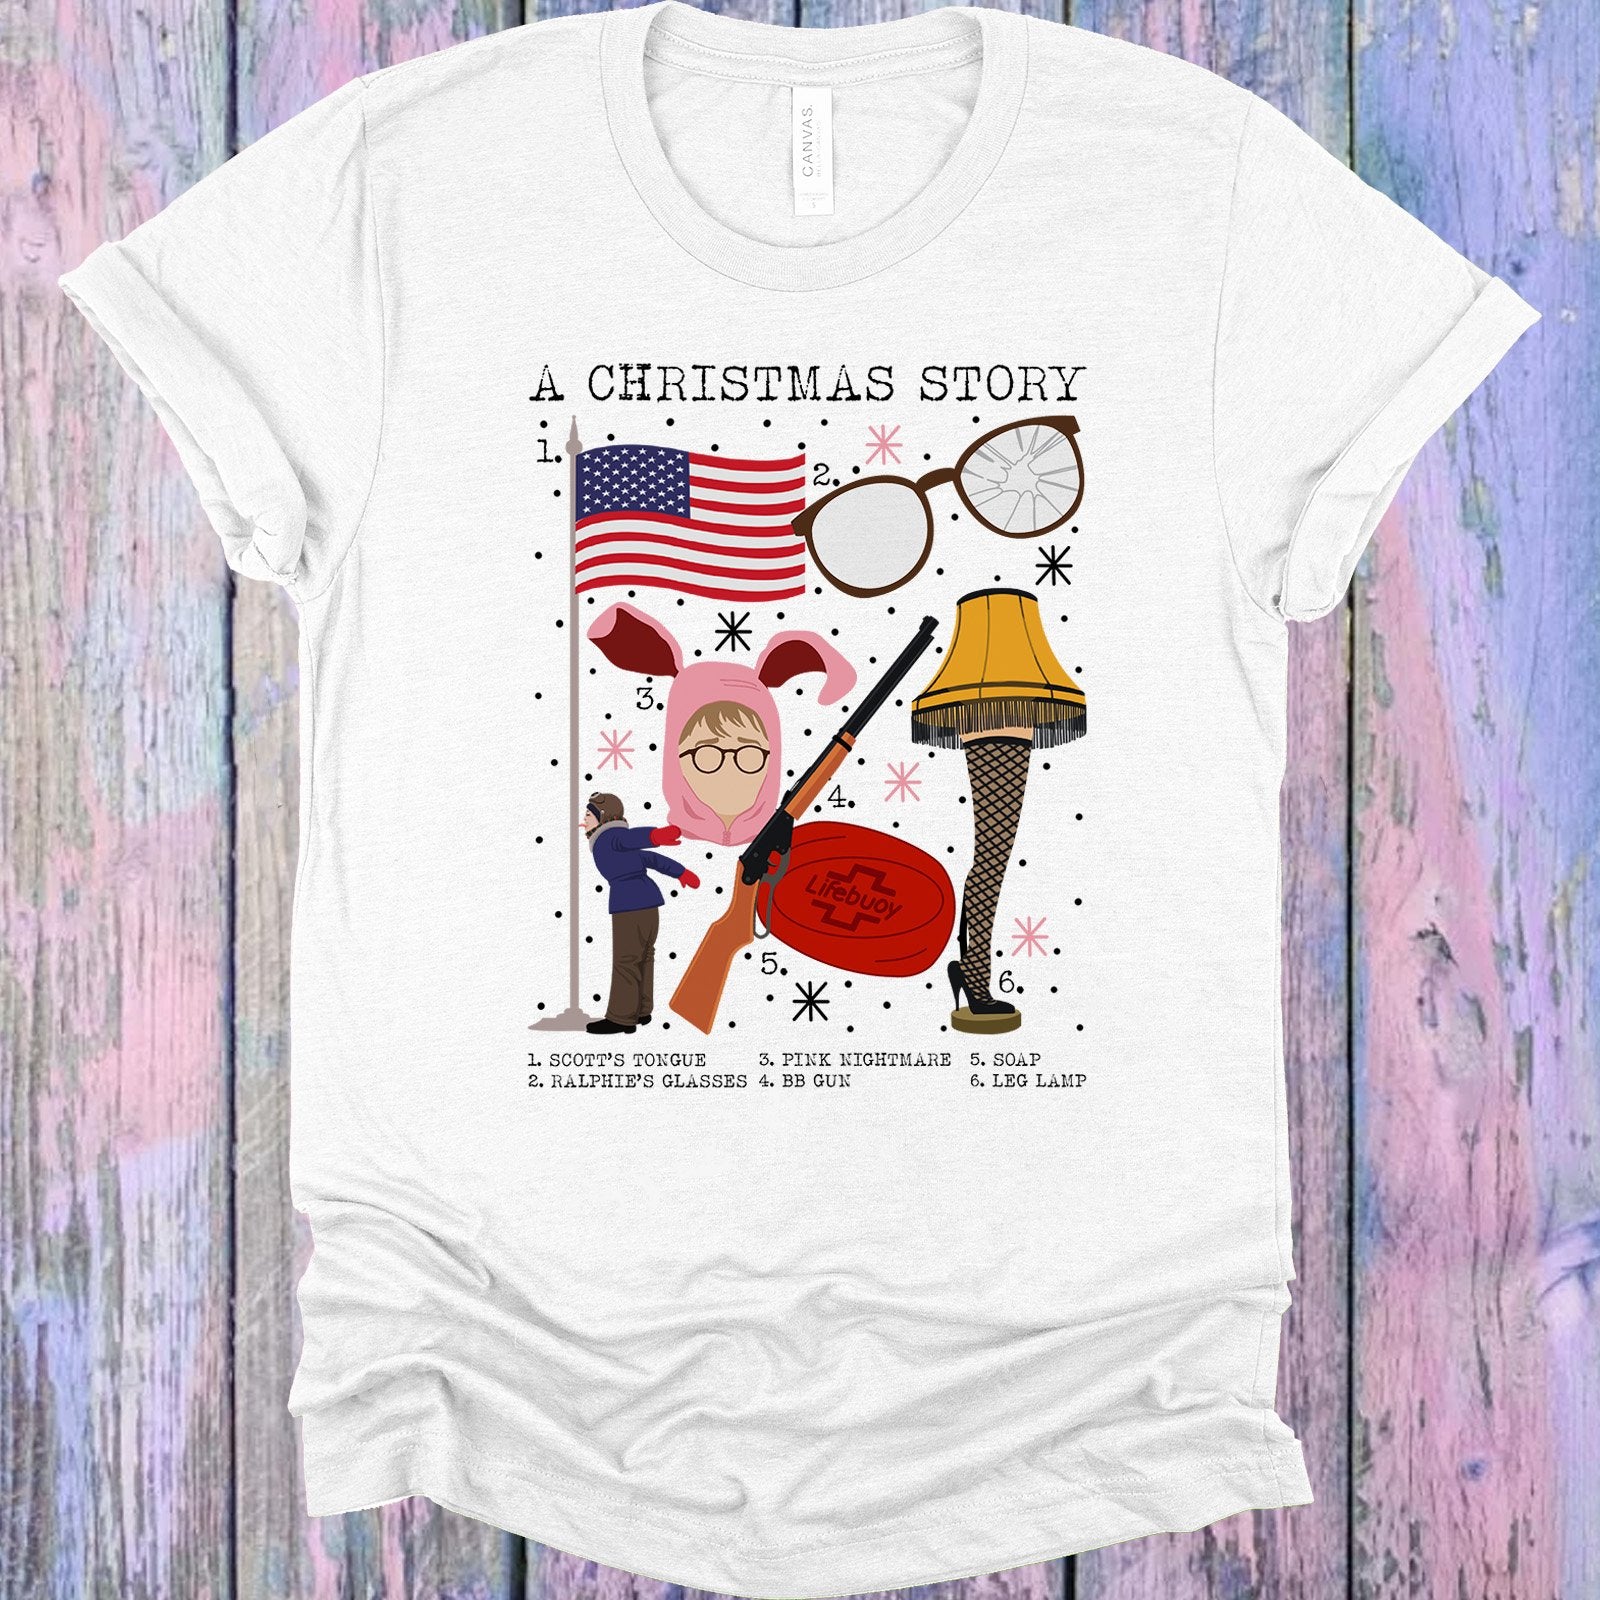 A Christmas Story Graphic Tee Graphic Tee